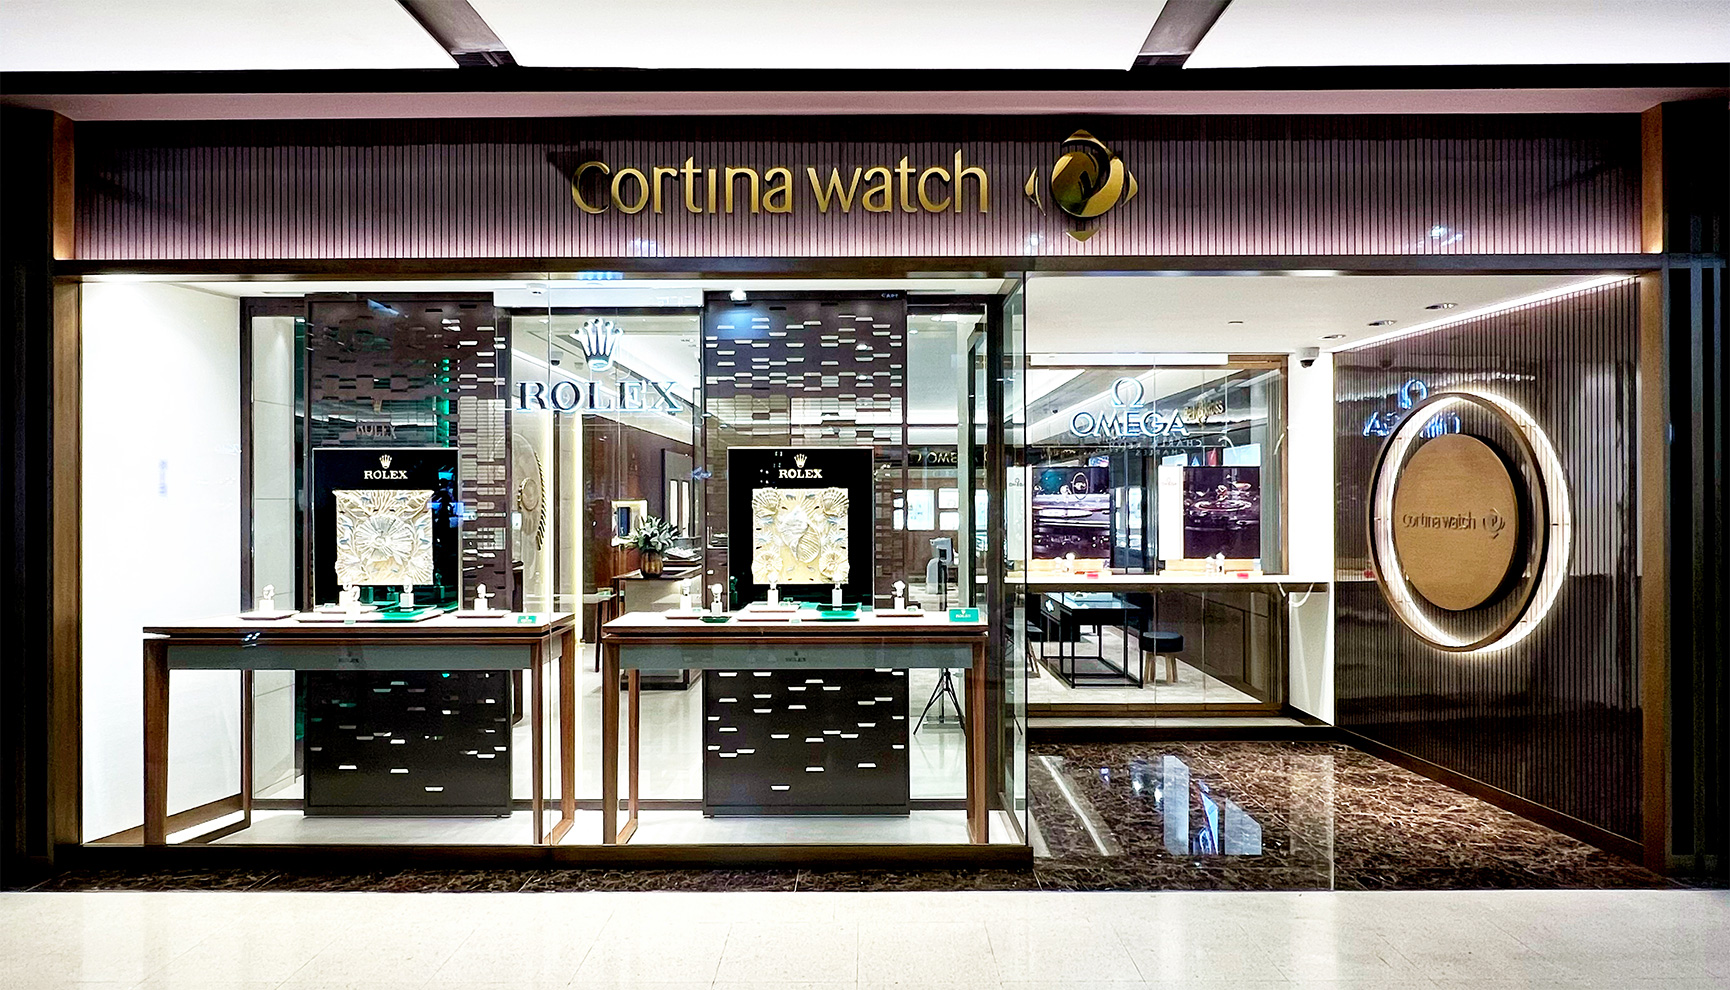 Corum And Cortina Watch Host An Evening Cocktail To Unveil The New Admiral  AC-One Watches | Tatler Asia